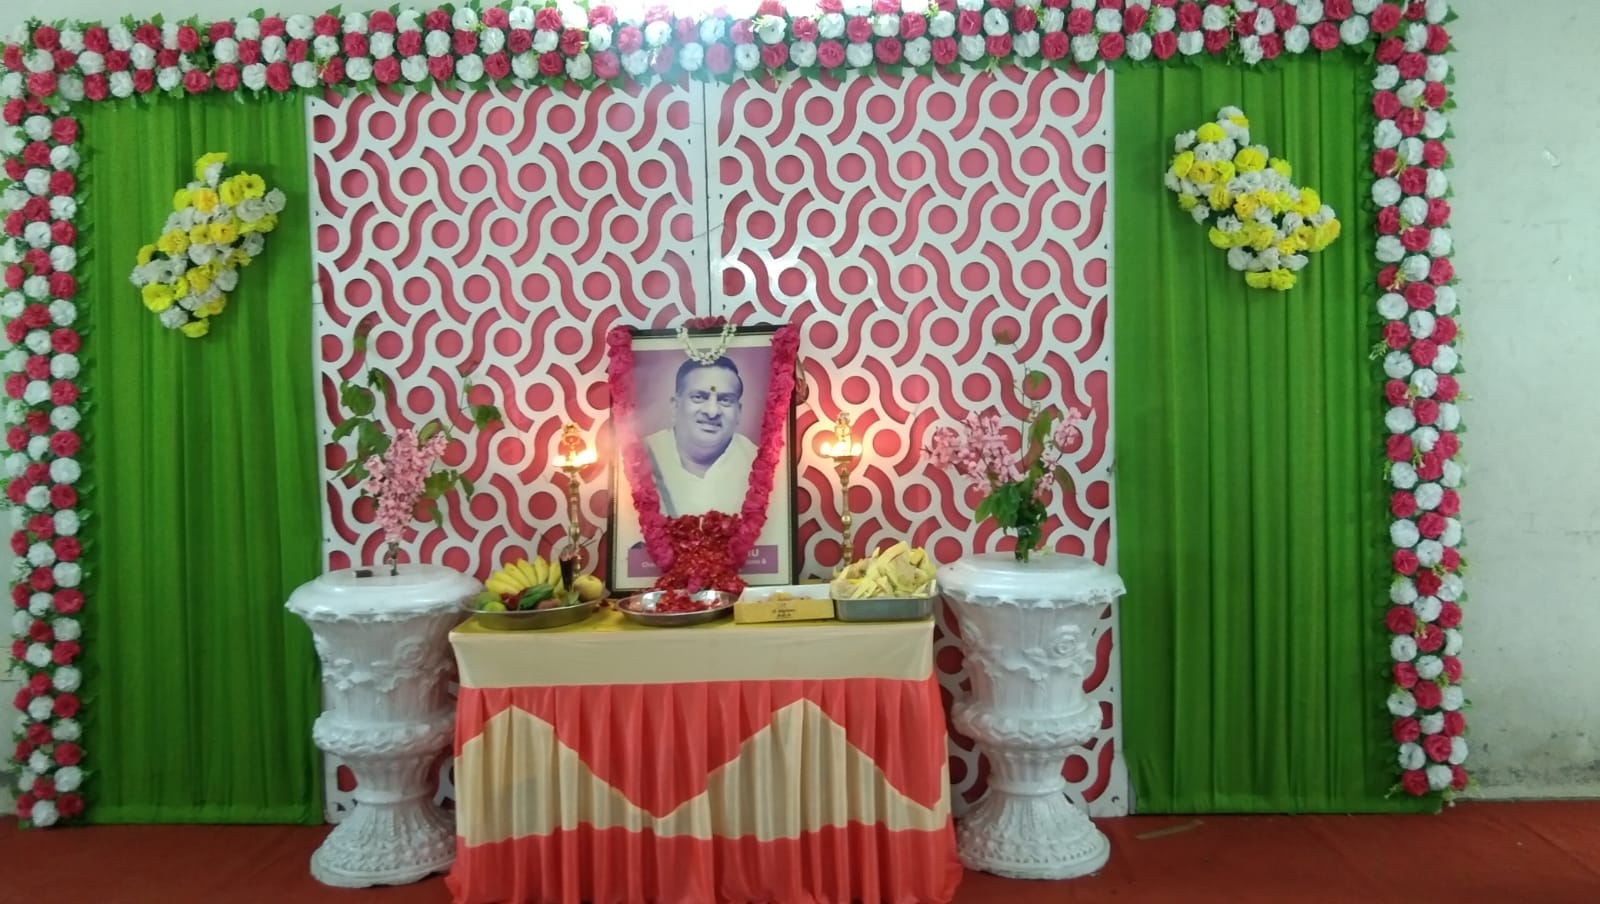 Staff & Students of SaiRam MHSS TVR paid floral tribute to Our Beloved Chairman on 71st Founders Day Celebration